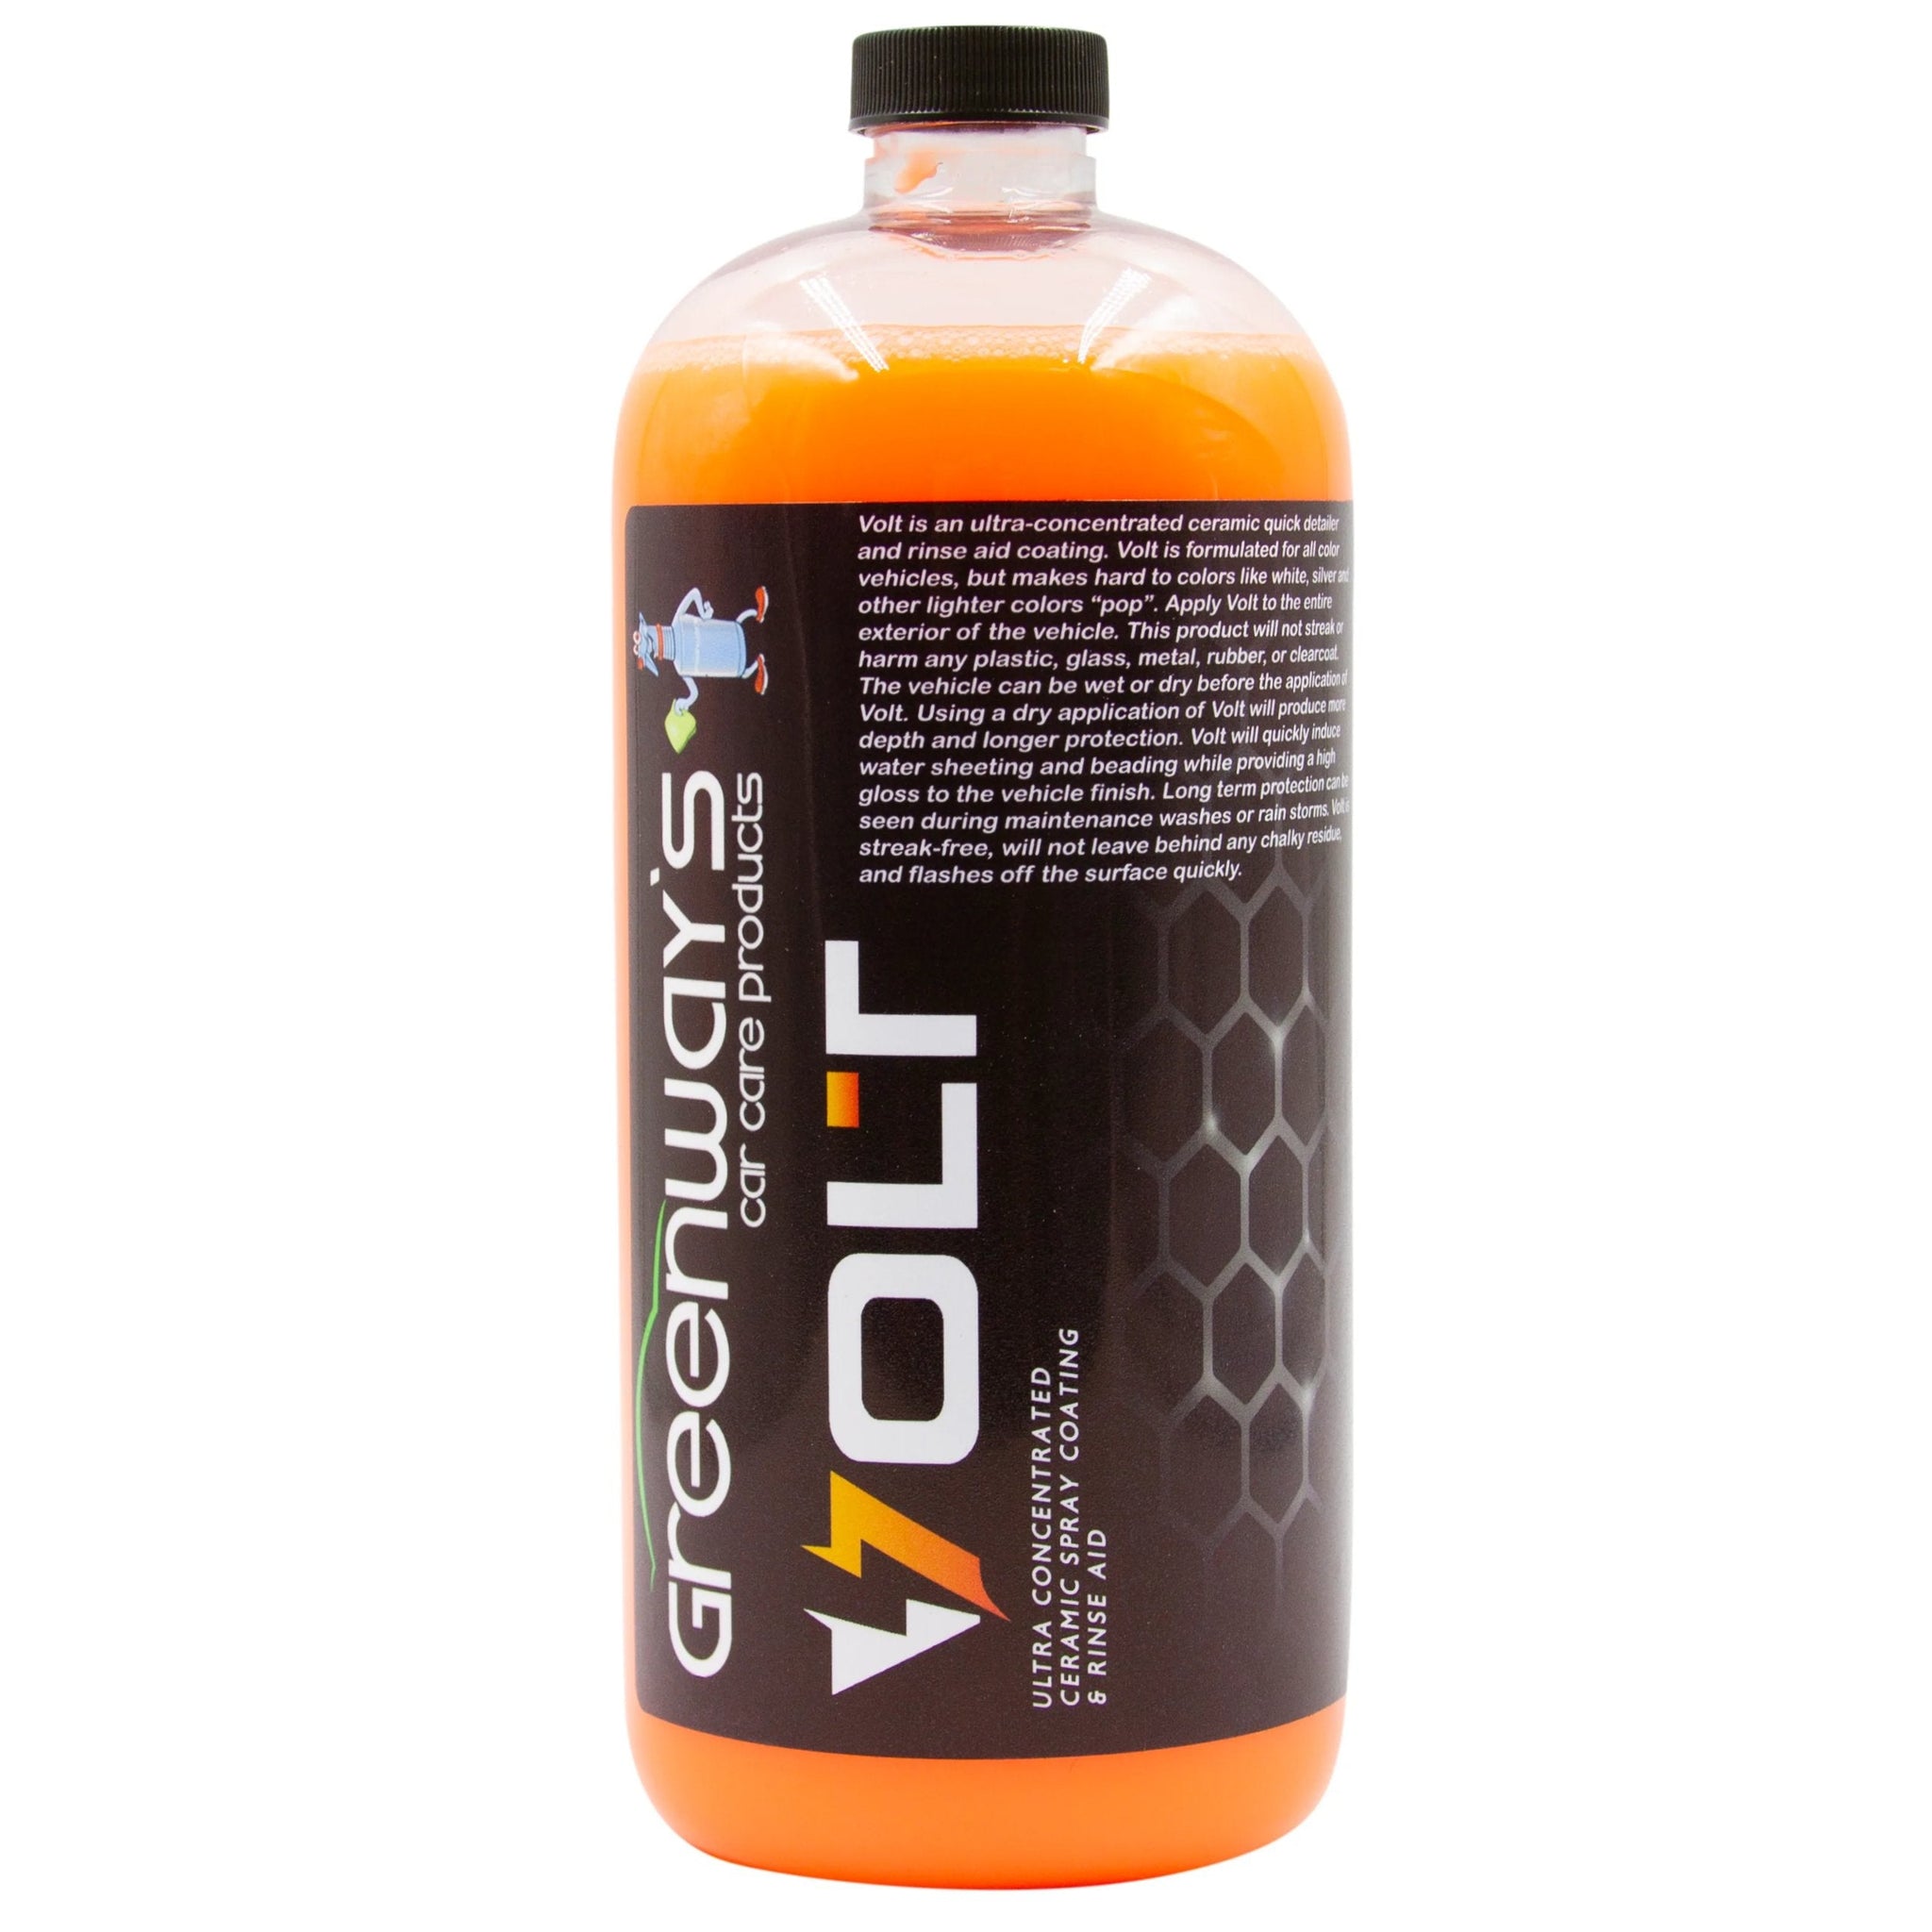 Volt- Ceramic Coating Concentrate and Drying Agent – Greenway's